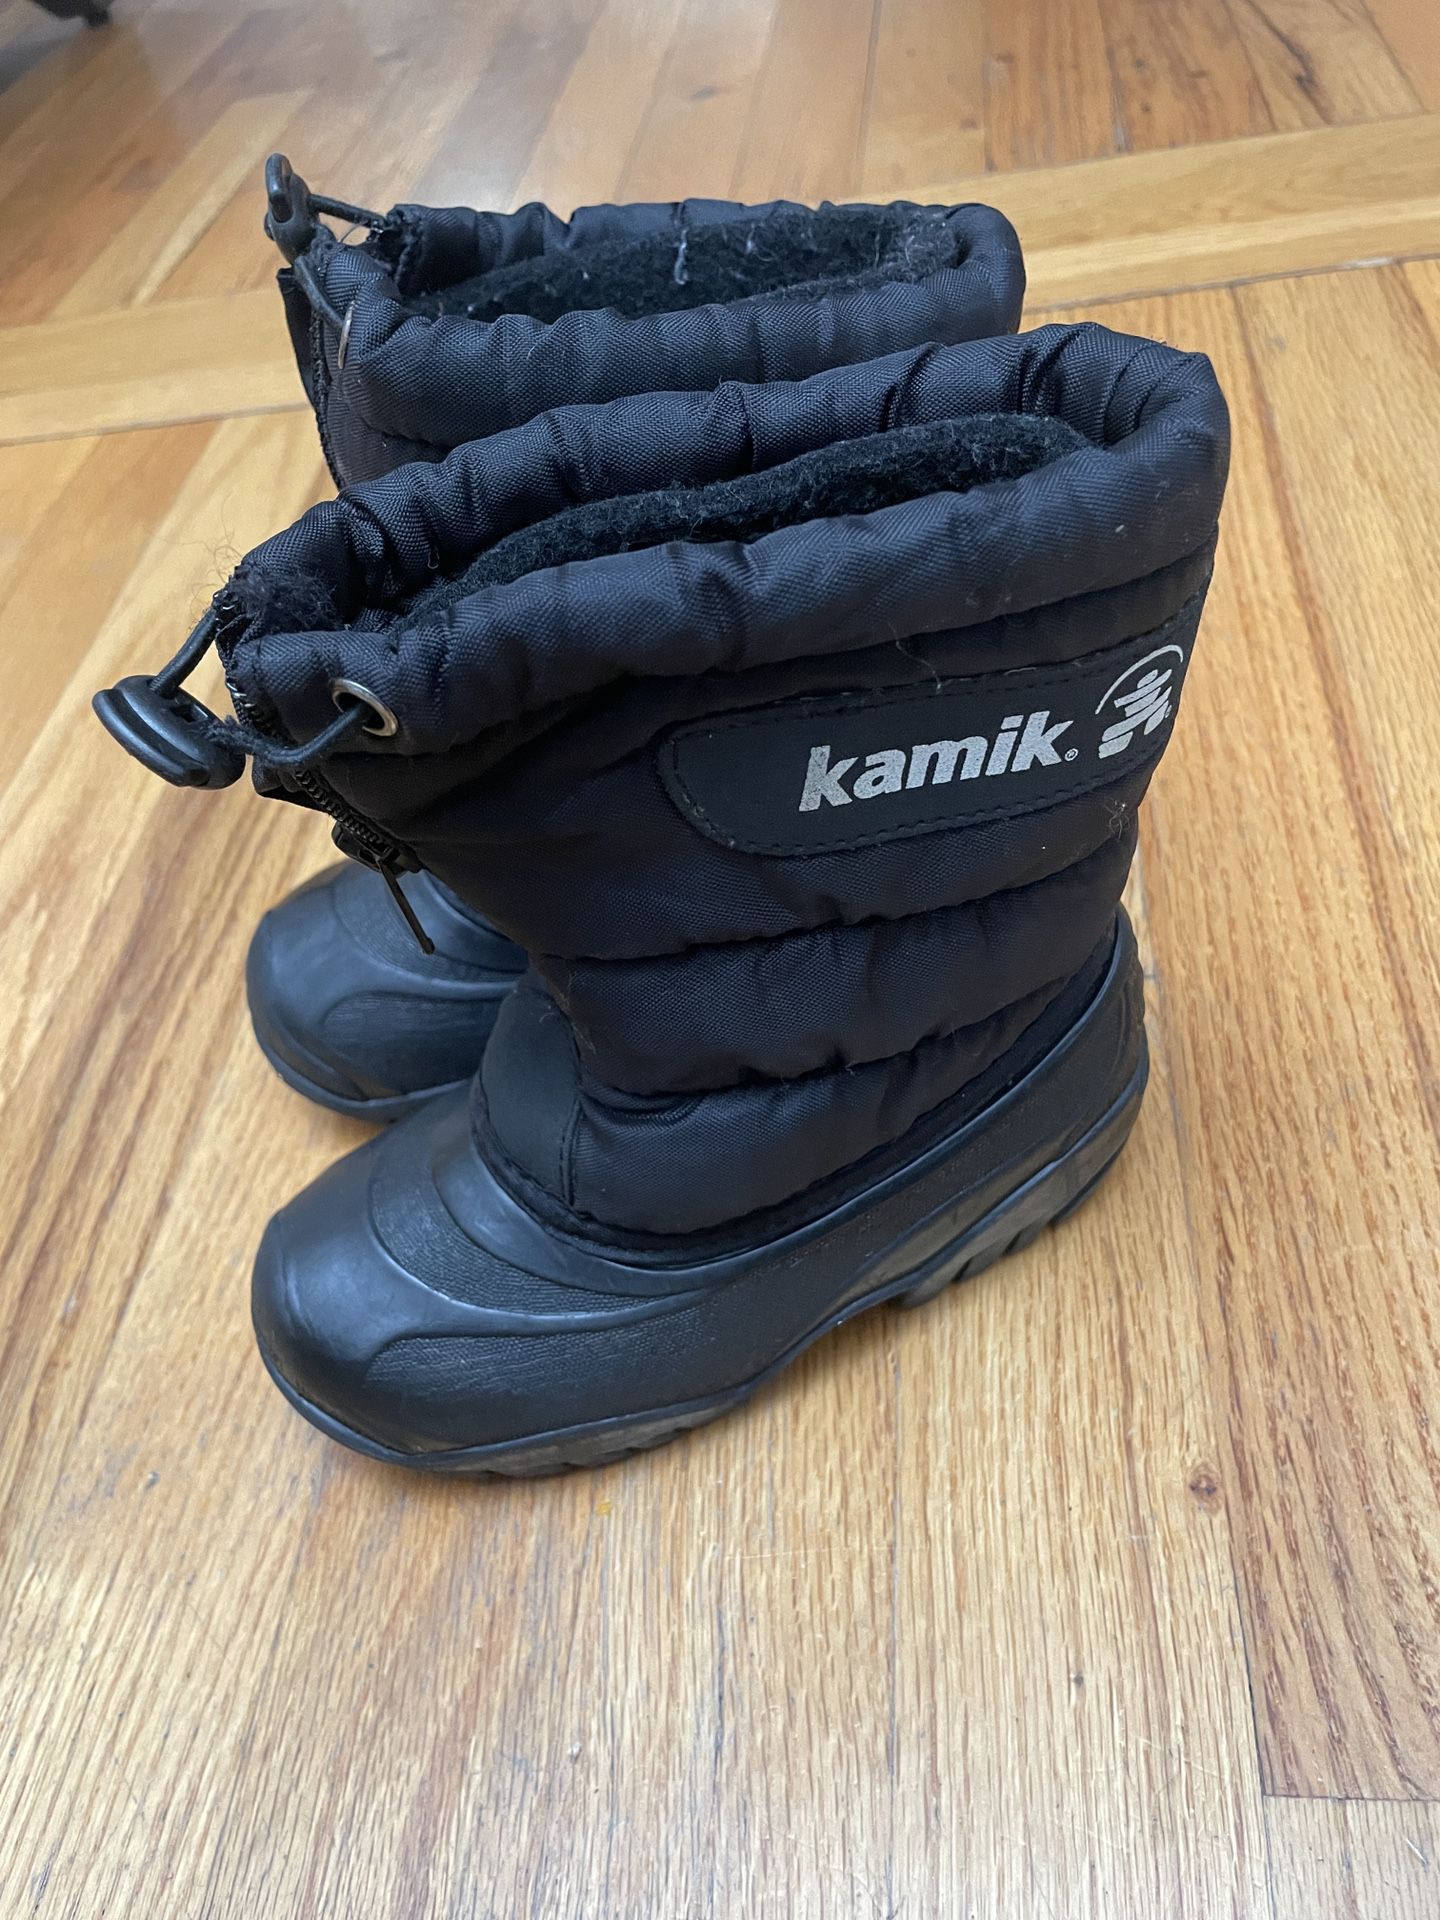 Great Toddler Snow Boots